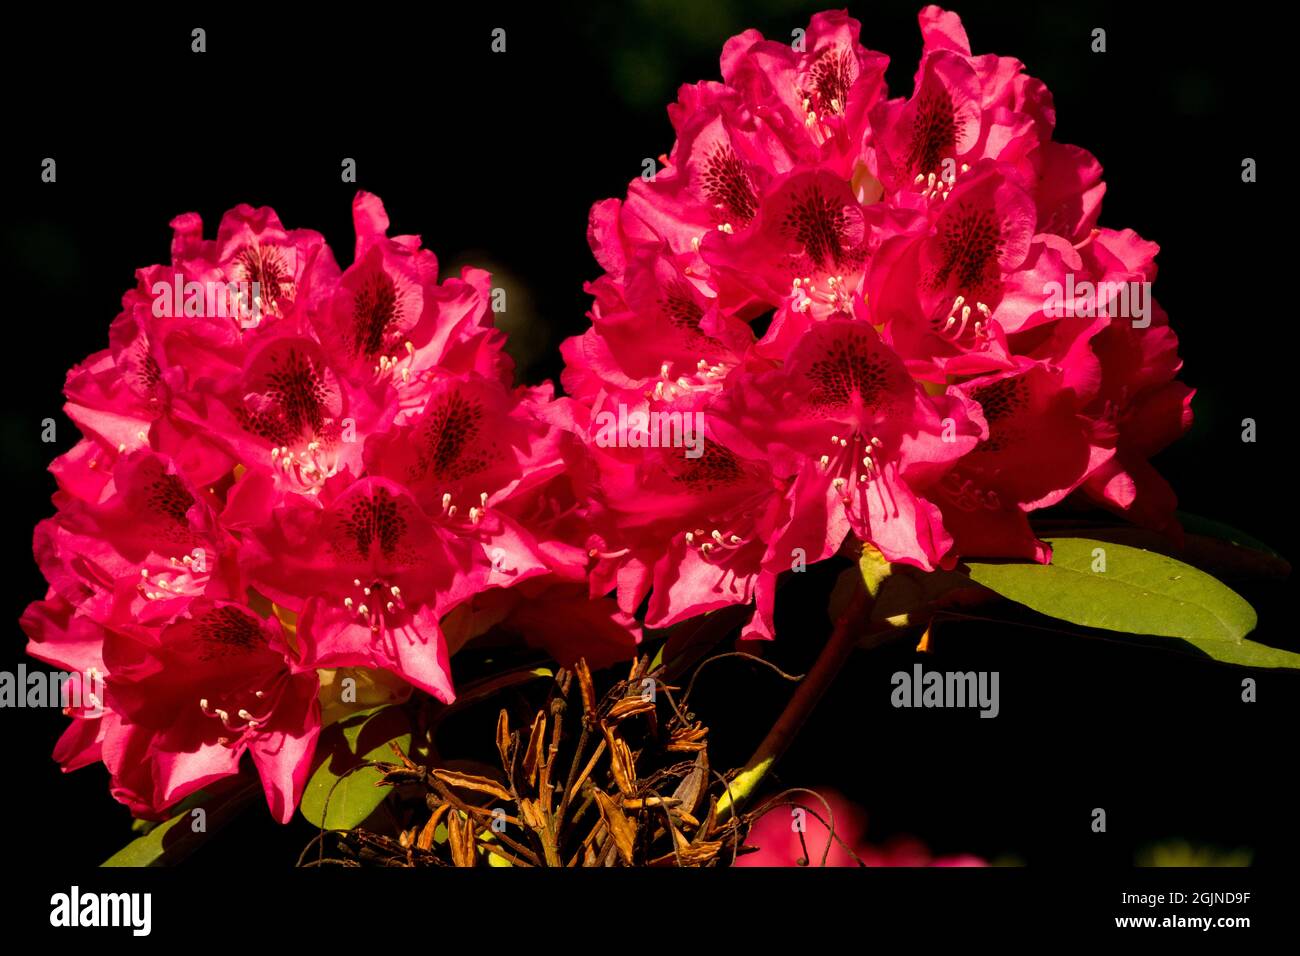 Red Rhododendron blooms 'Lady Clairmont' large blooms Stock Photo